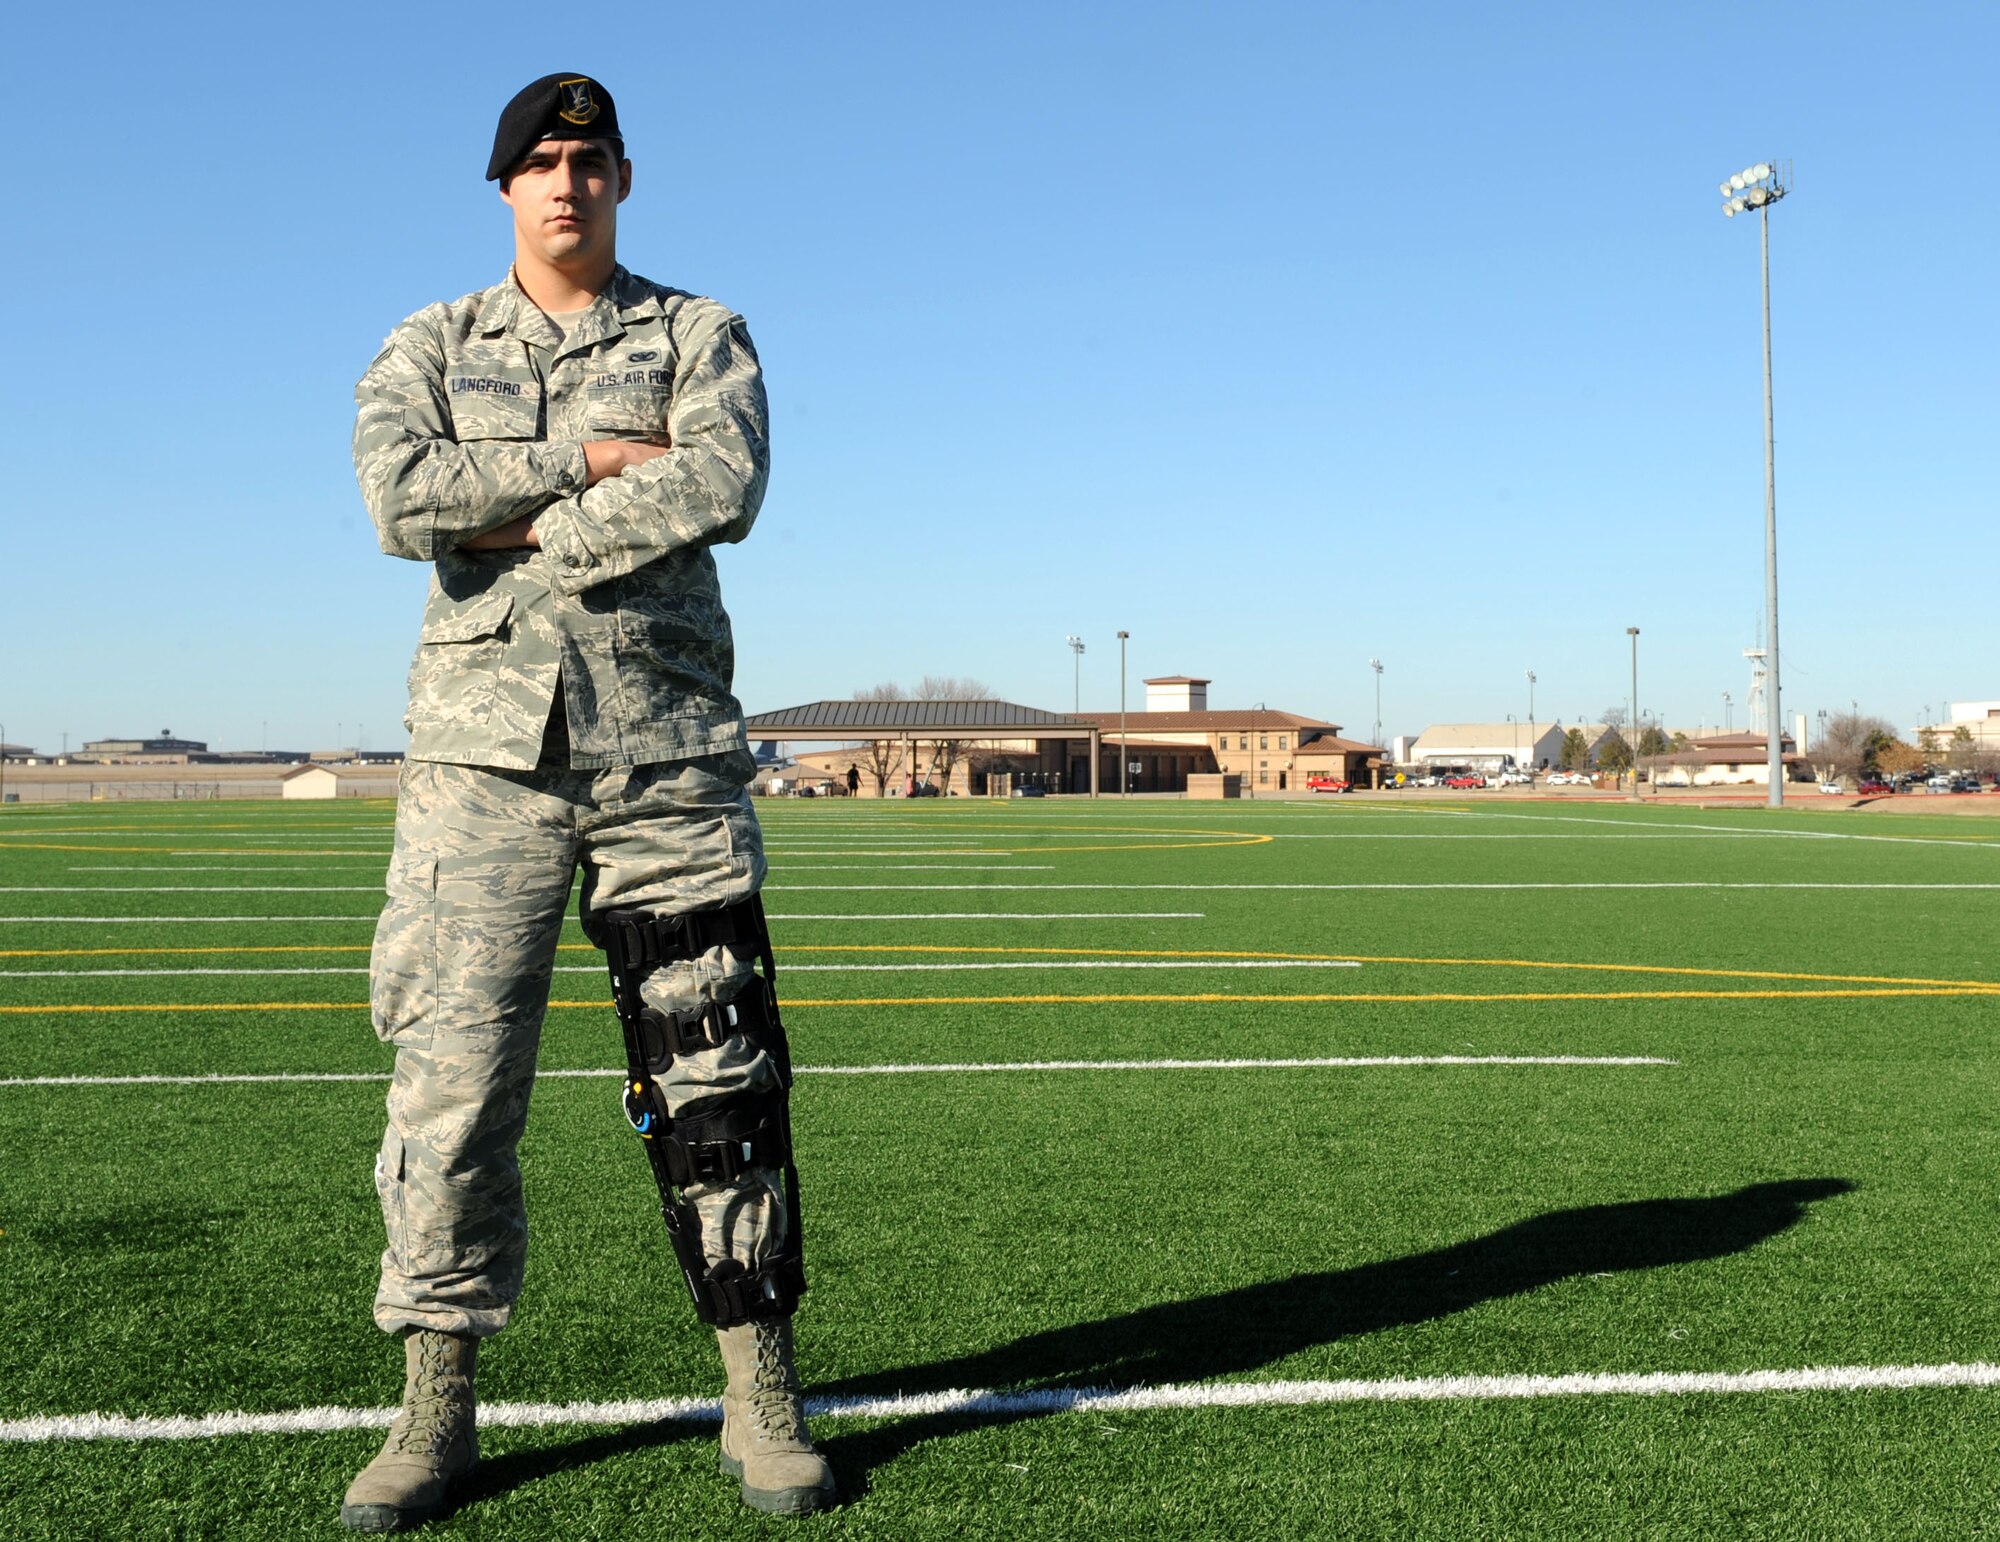 Airman 1st Class Jeffrey Langford, 22nd Security Forces Squadron elite guardsman, poses for a photo, Jan. 15, at McConnell Air Force Base, Kan. Langford tore several ligaments in his knee during an intramural football game and is going through rehab to rejoin the ranks of the elite guardsmen. (U.S. Air Force photo/Airman 1st Class David Bernal Del Agua)